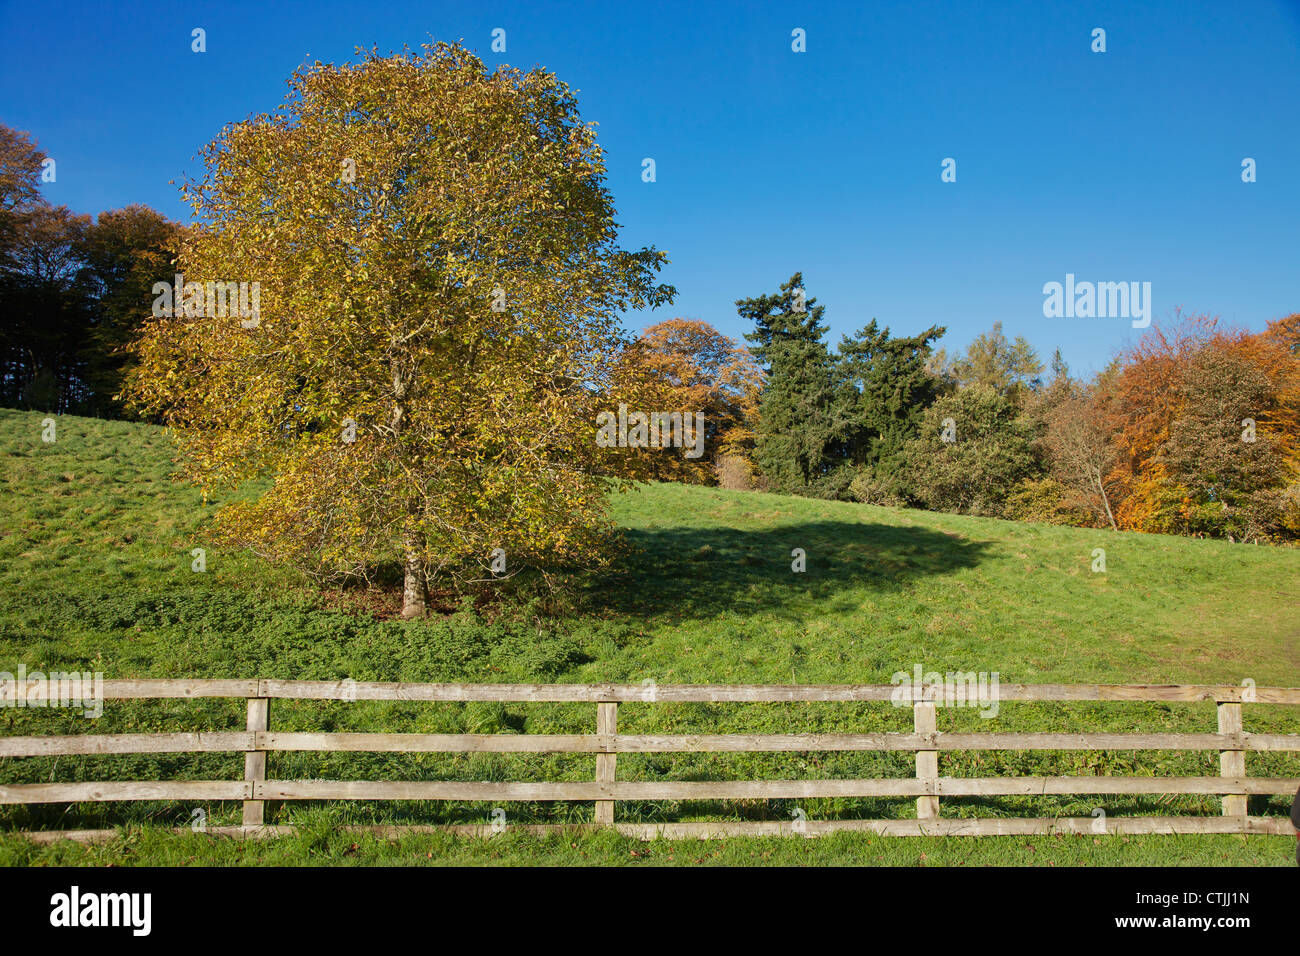 A Wooden Rail Fence With Trees In Autumn Colours; Scottish Borders, Scotland Stock Photo